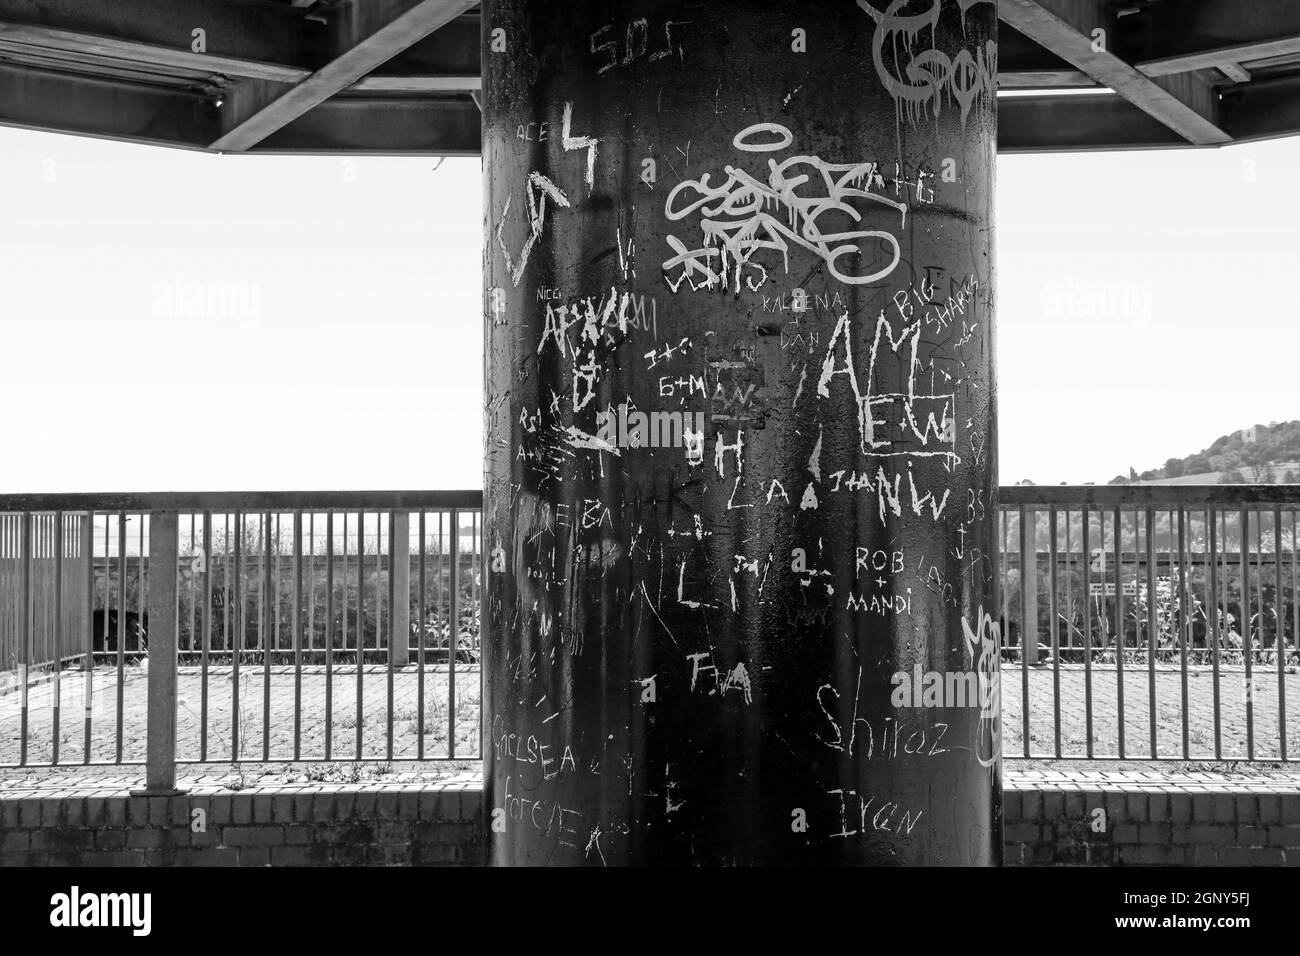 Monochrome image of Urban art in the form of graffiti on the central pillar of the Viewpoint Point at Mount Wise Devonport, overlooking the Hamoaze an Stock Photo